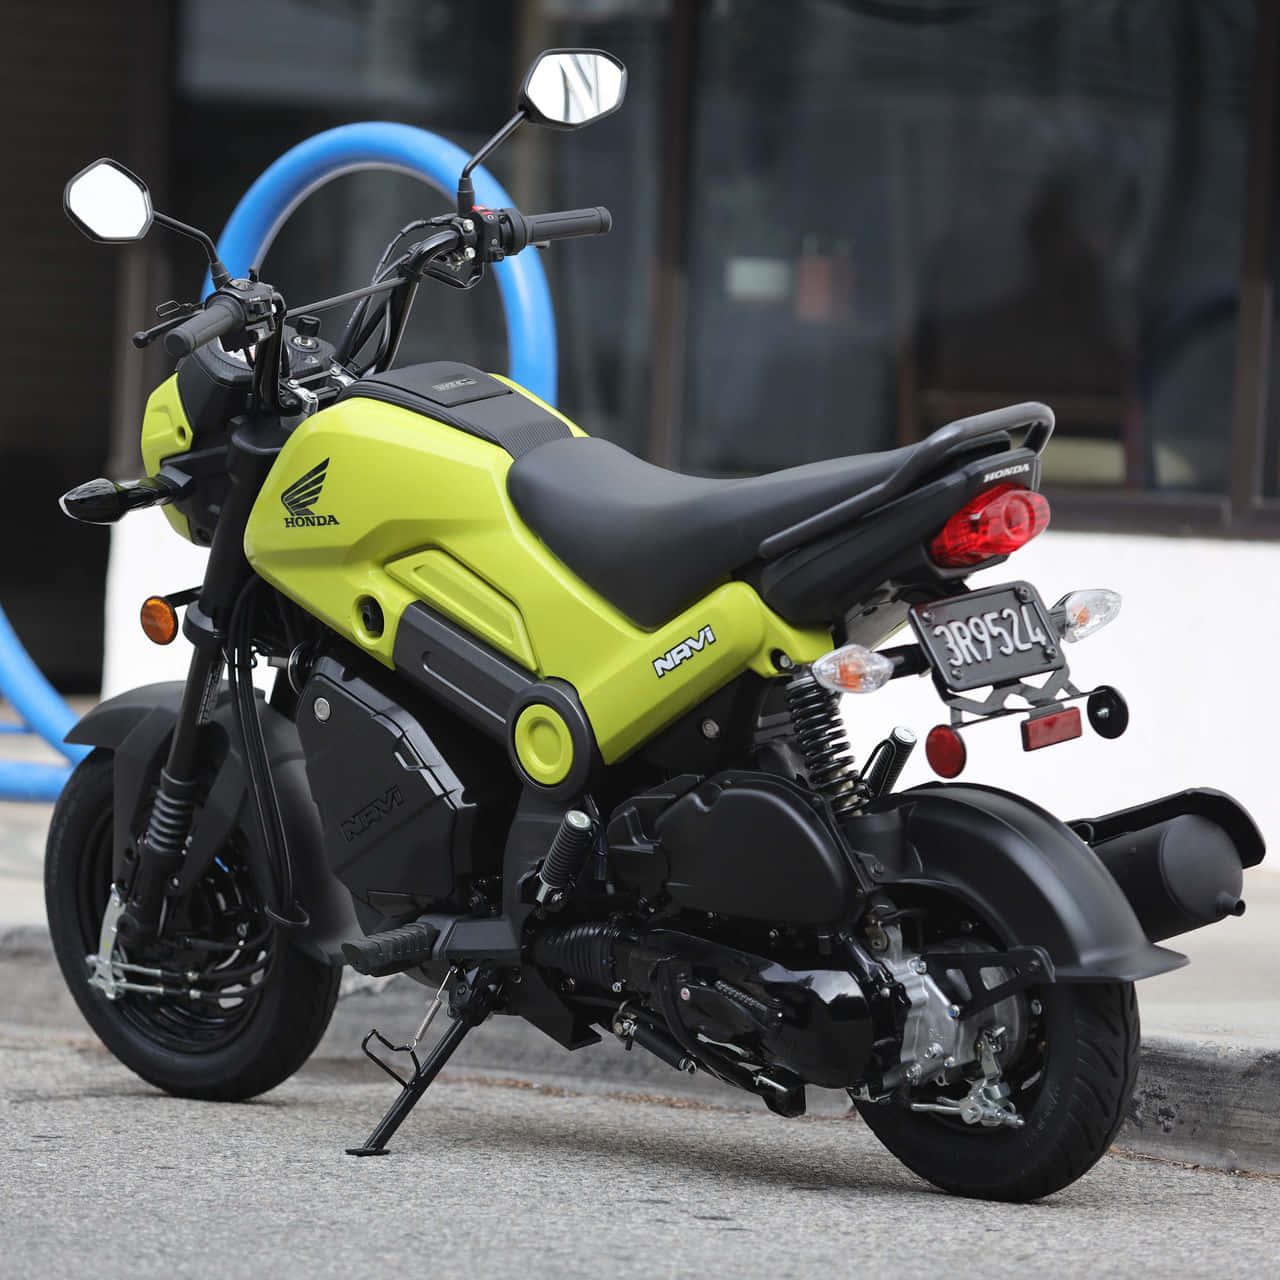 Scooter Black And Neon Green Honda Navi Picture